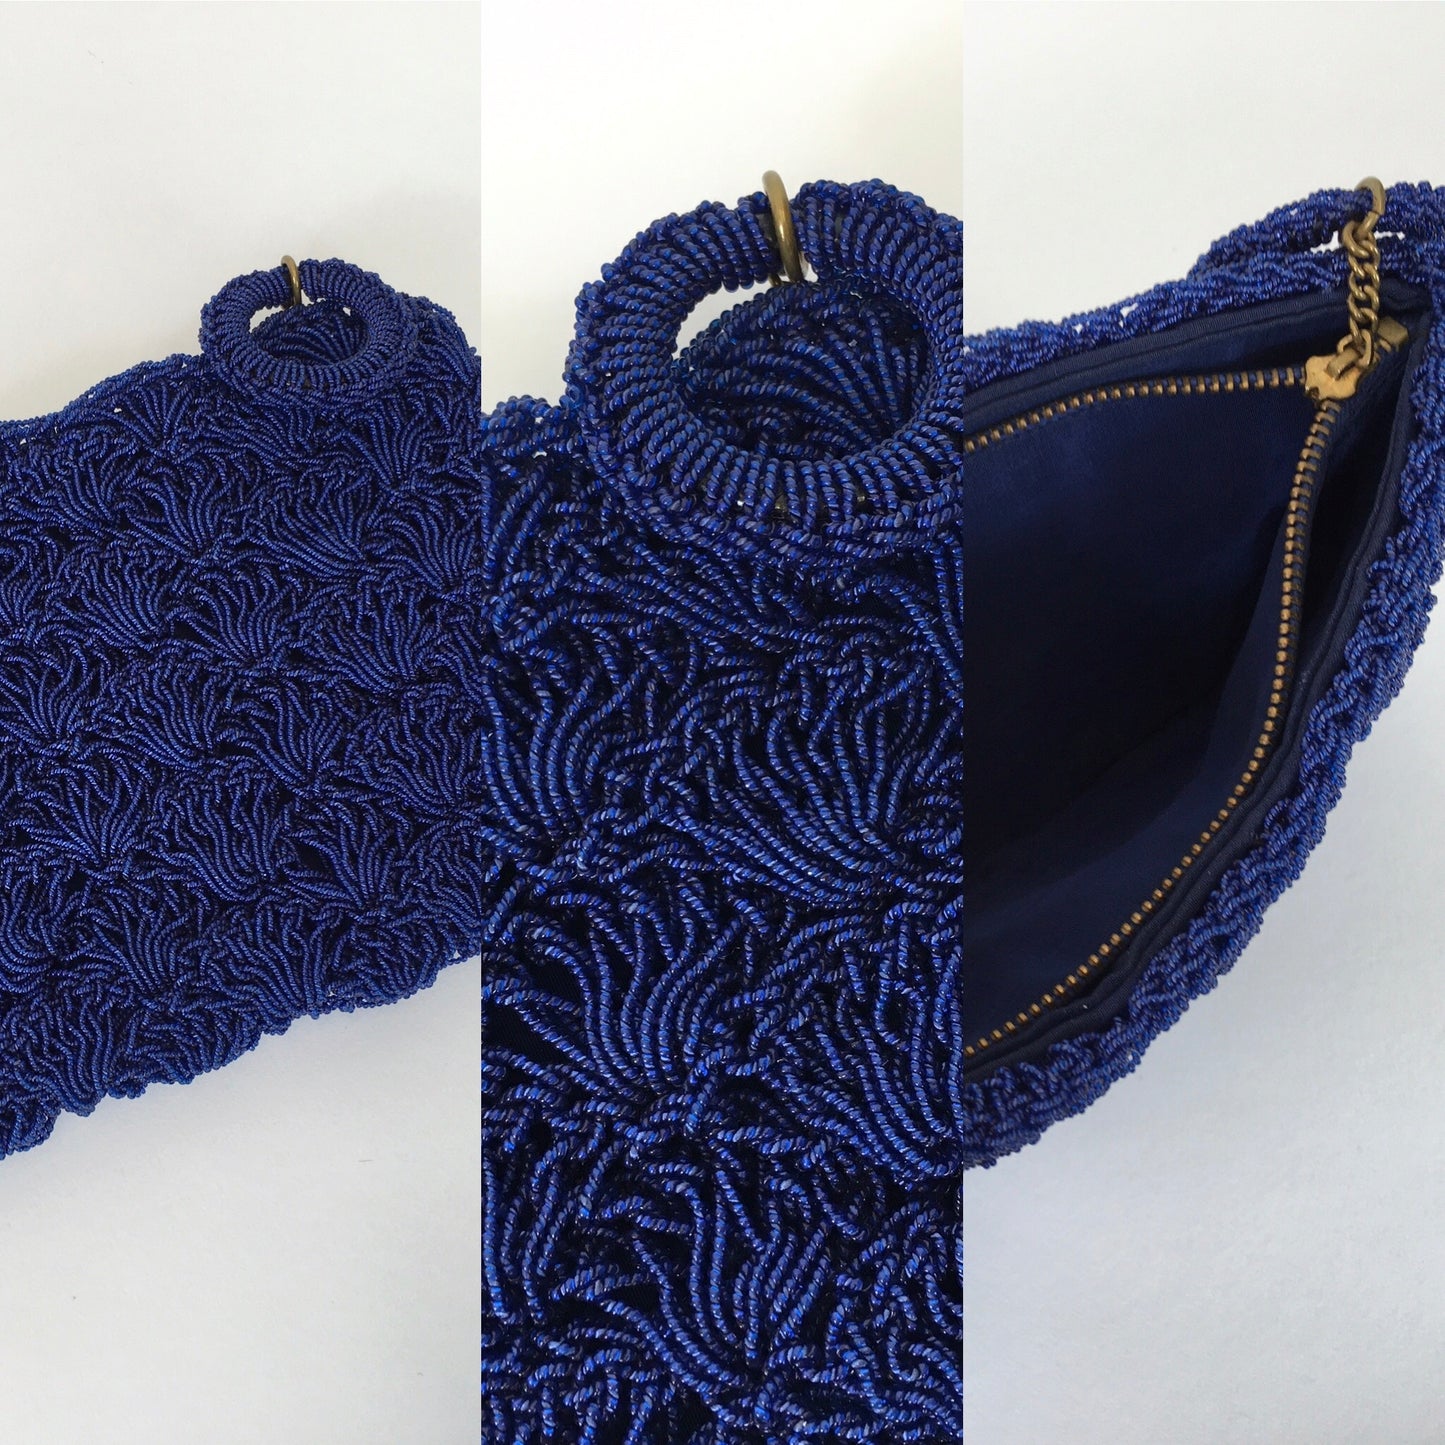 Original 1950’s Royal Blue Beaded Plastic Clutch - With Matching Circular Pull